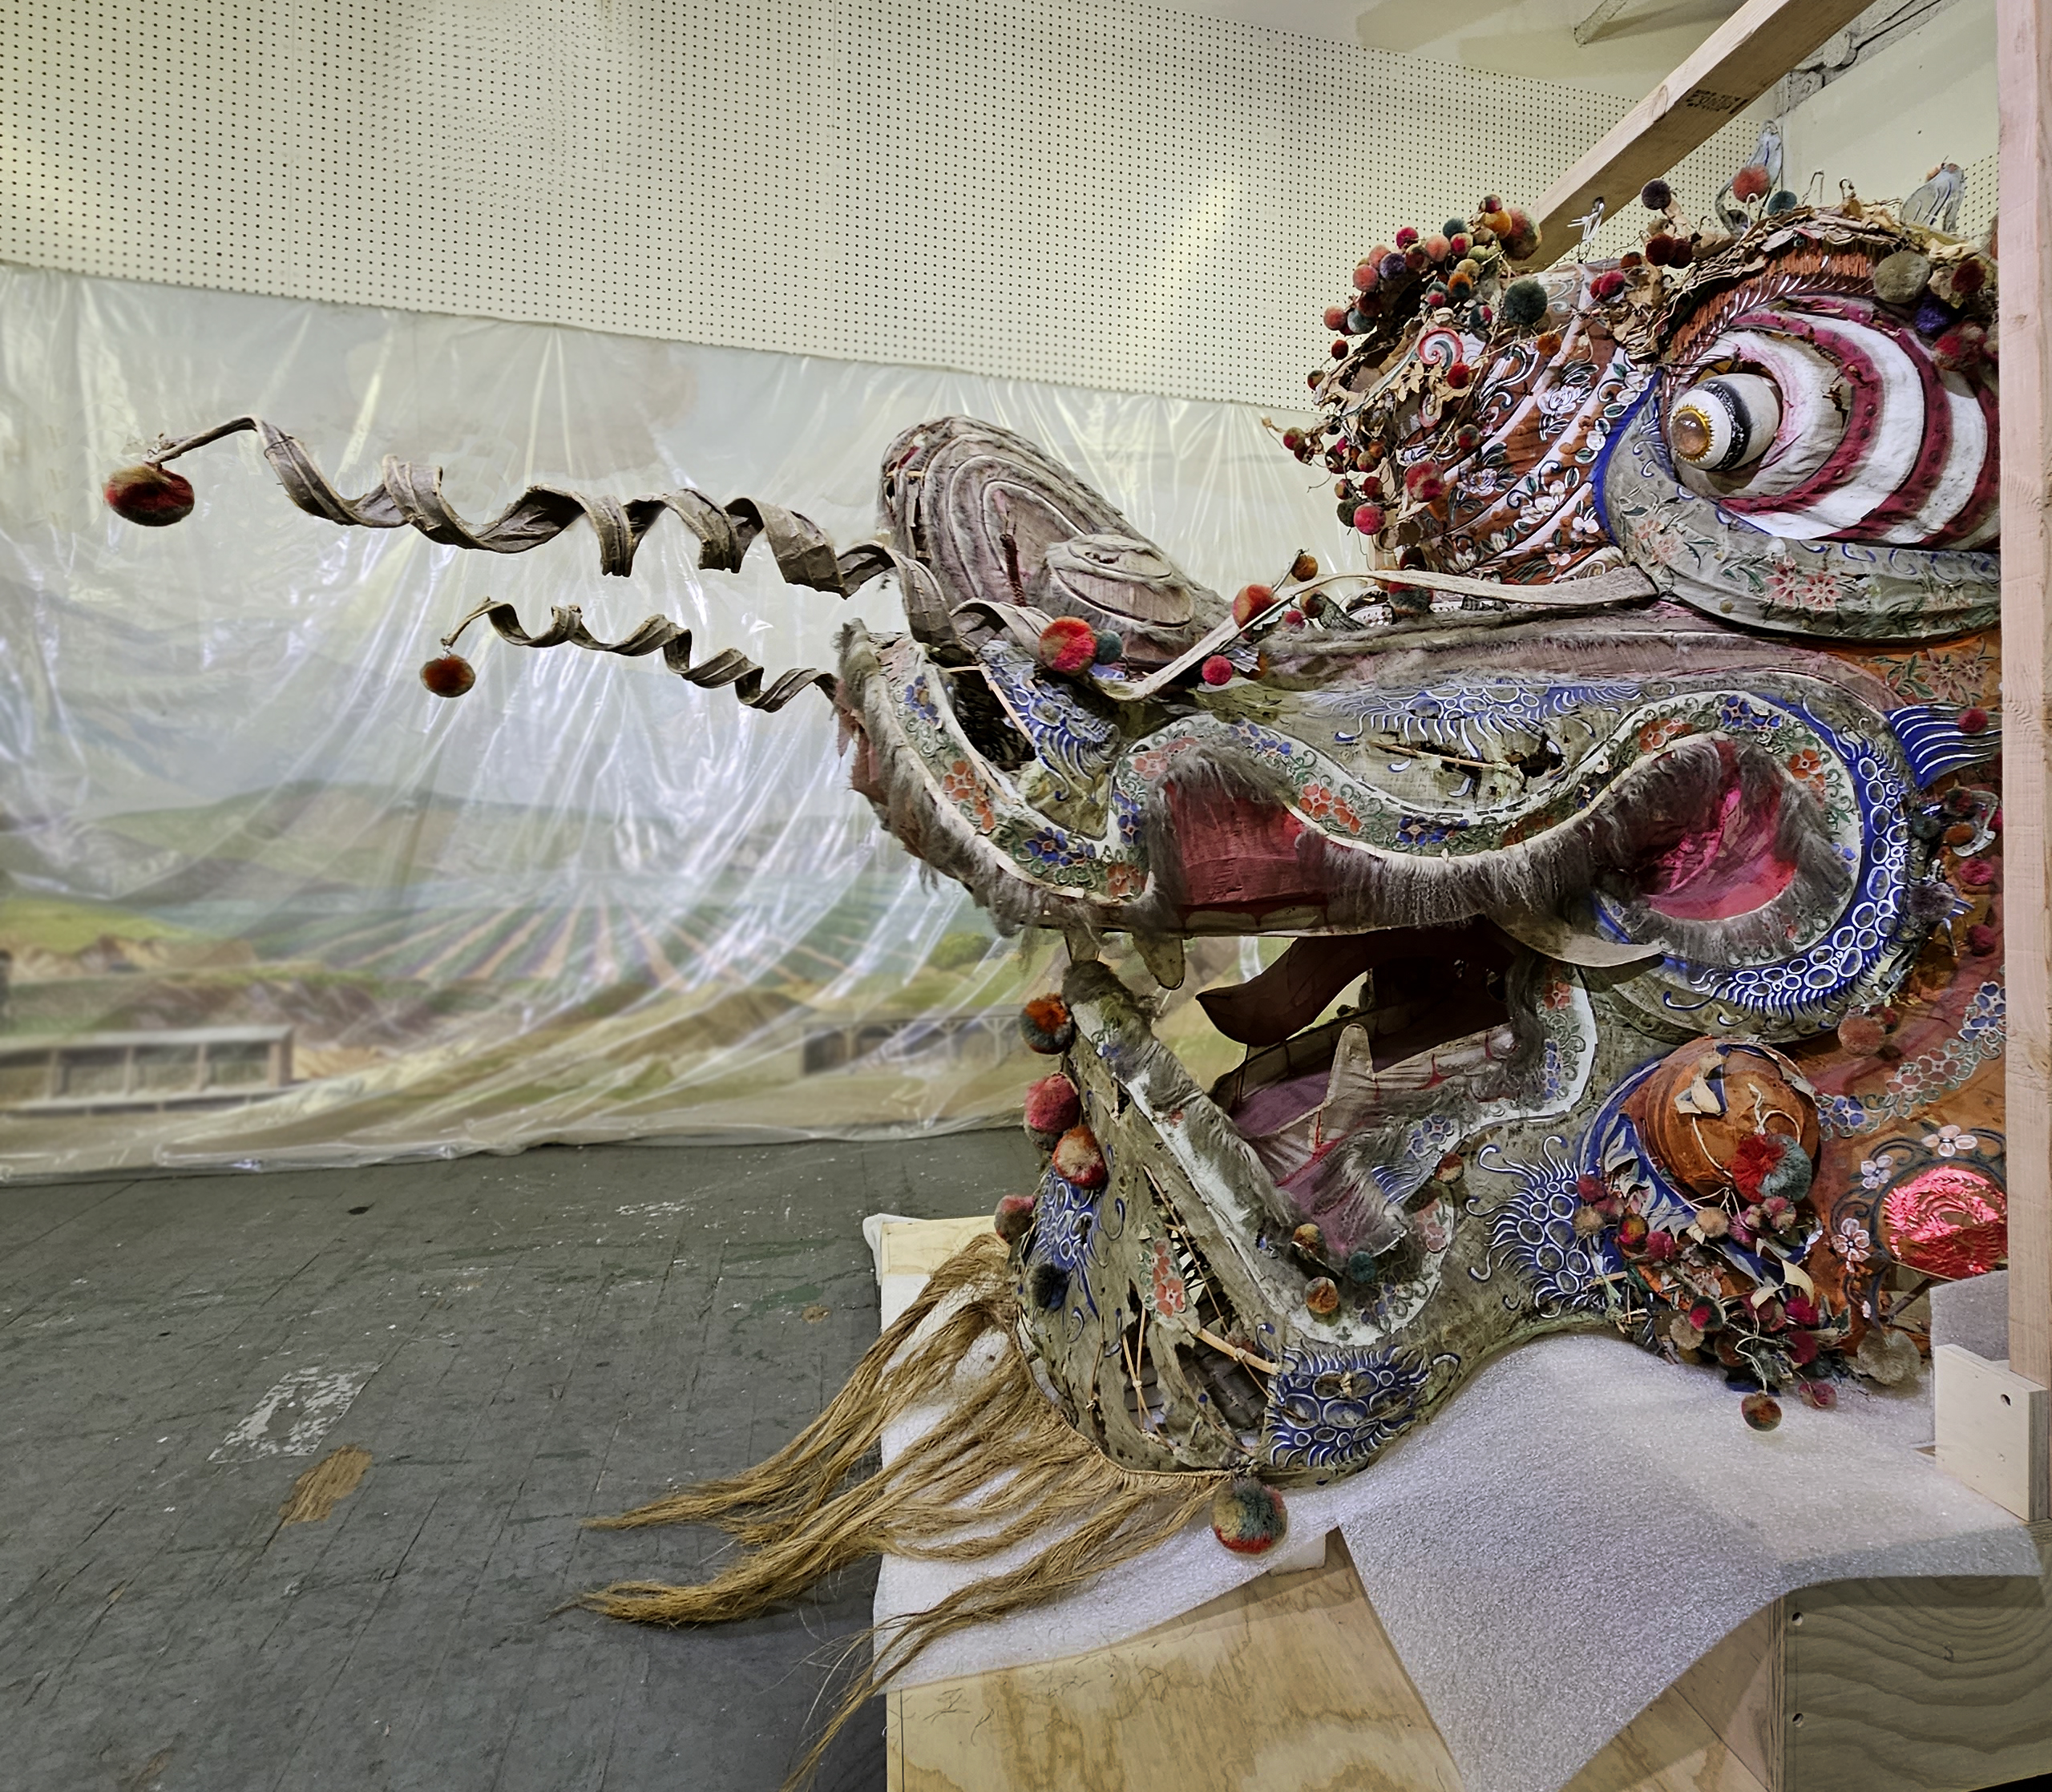 A large dragon head made from various crafting materials in storage